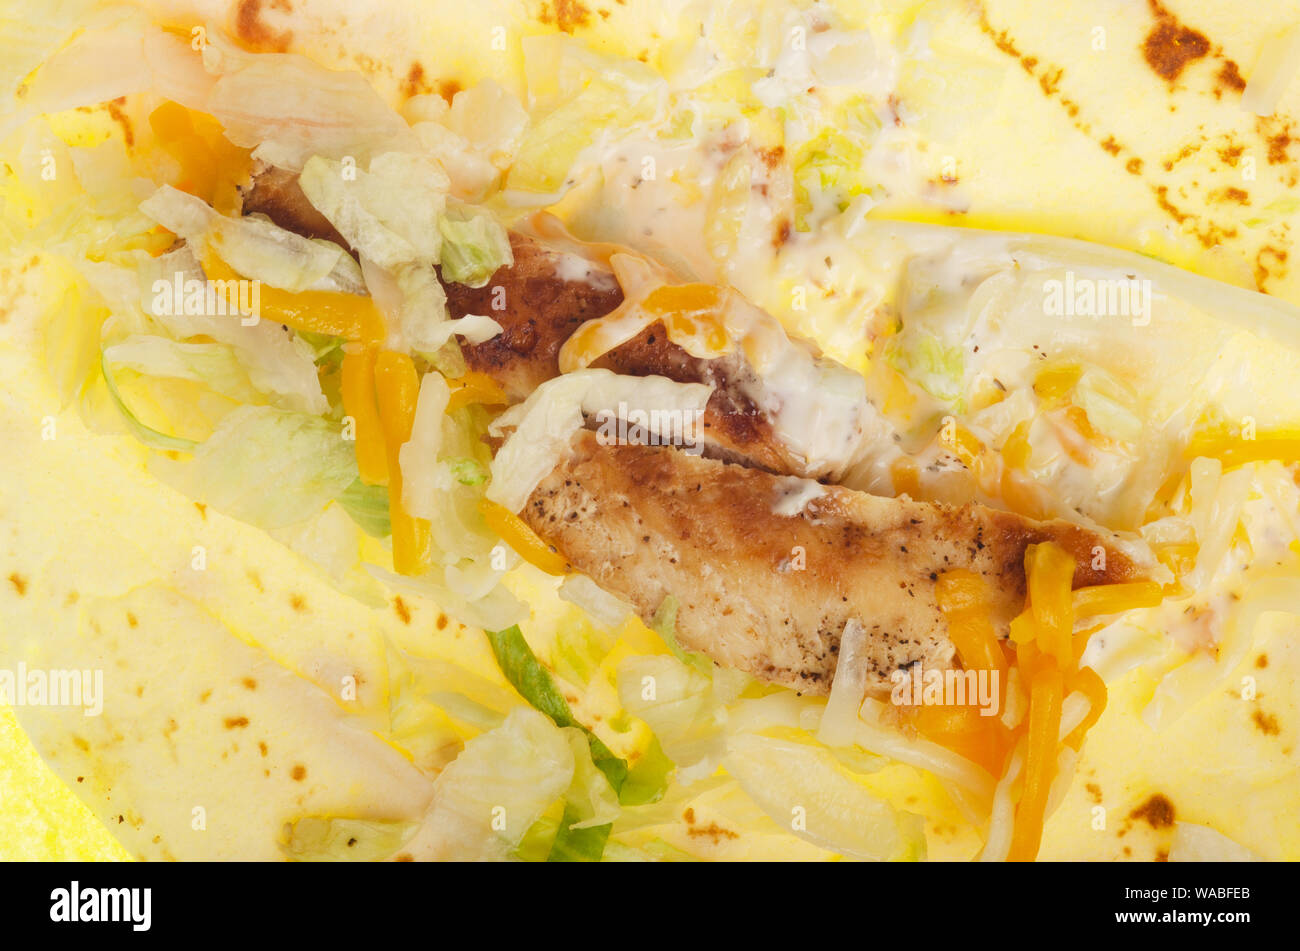 McDonald’s ranch grilled chicken snack wrap unwrapped inside showing filling ingredients Stock Photo